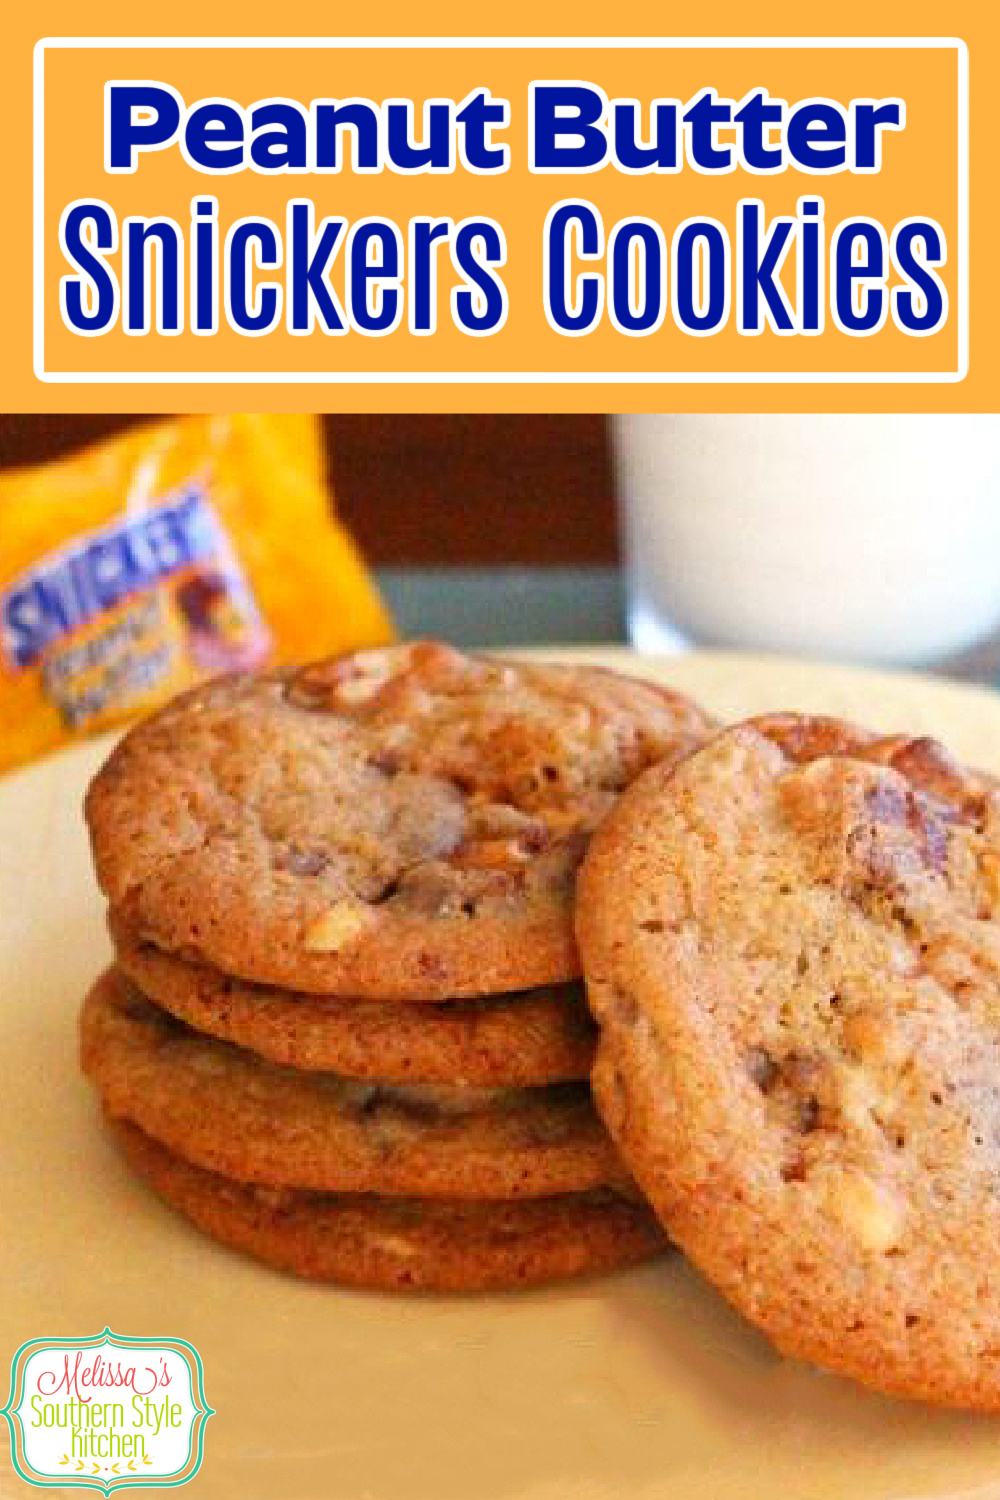 Snickers candy bars and peanut butter cookie dough collide in these Peanut Butter Snickers Cookies #candybars #candycookies #snickersbars #snickerscookies #holidaybaking #peanutbuttercookies